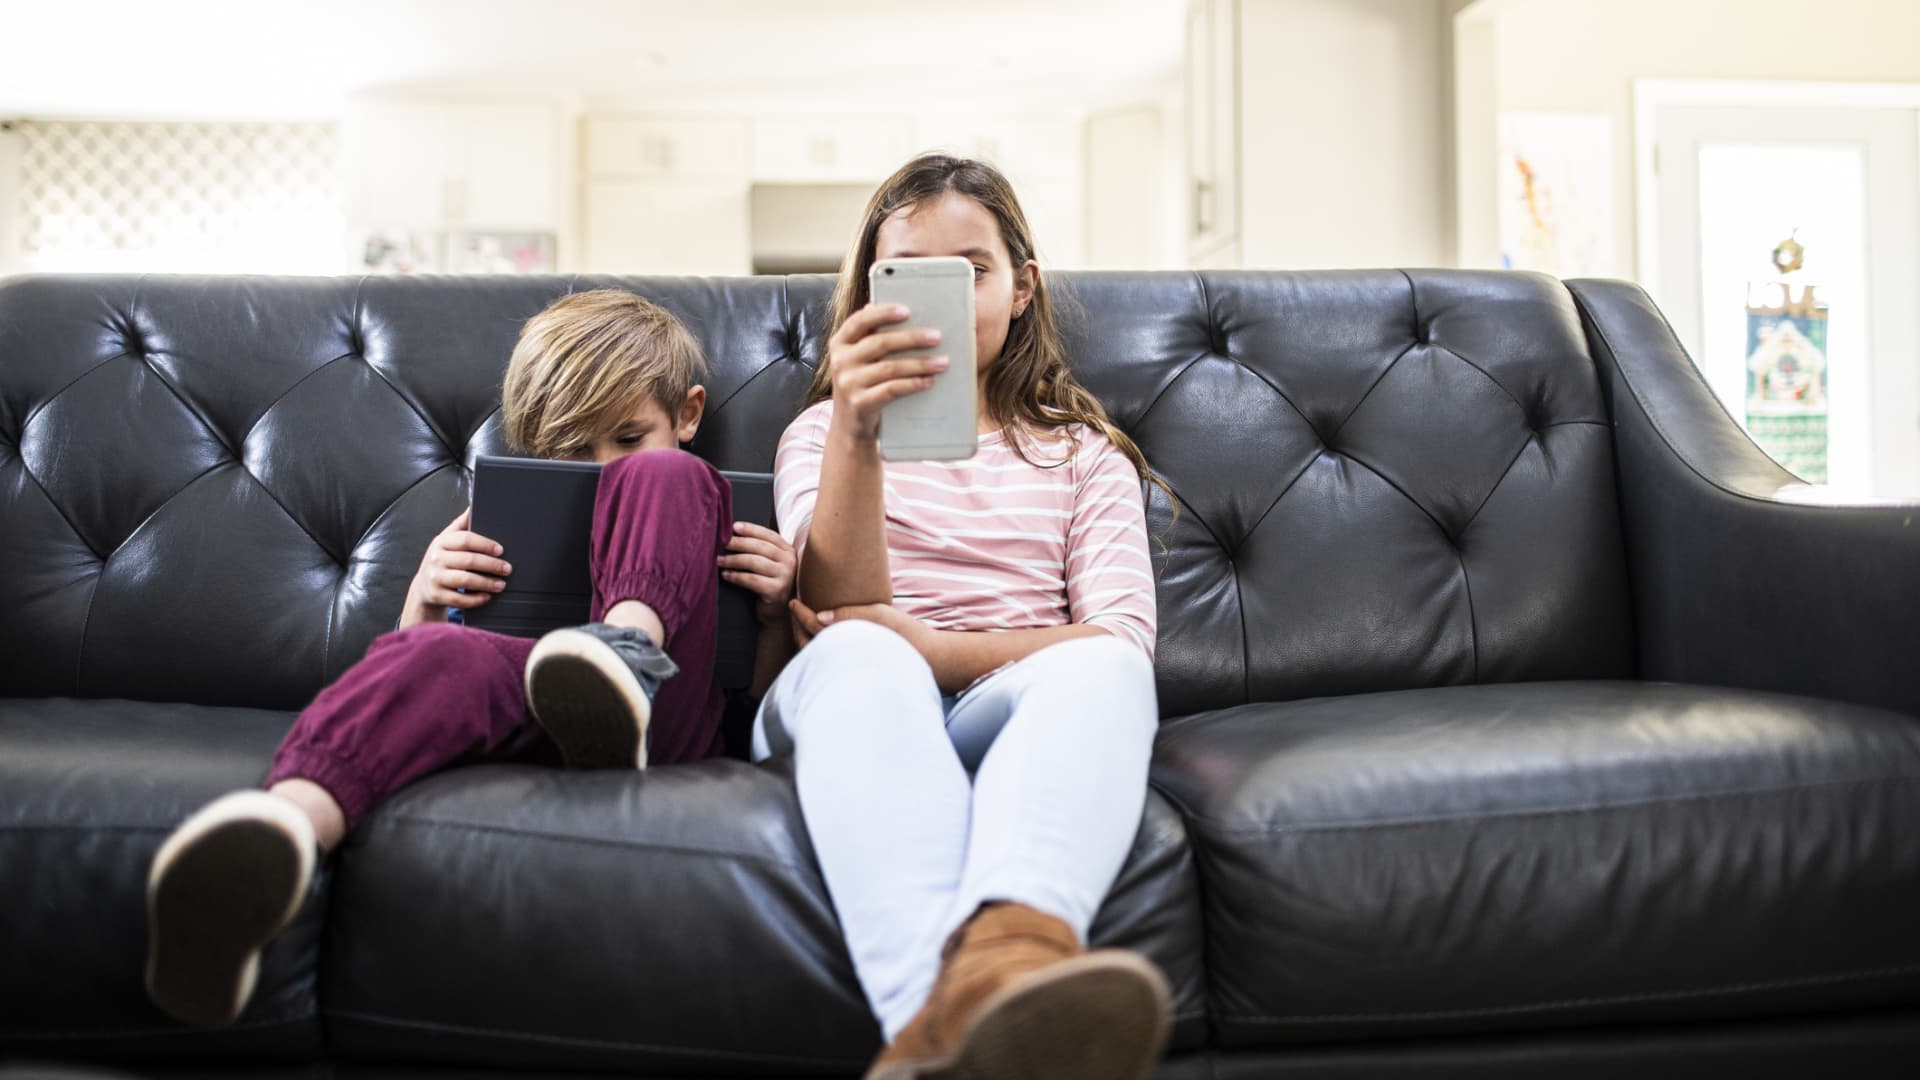 Louisiana law would require parental permission to use social media